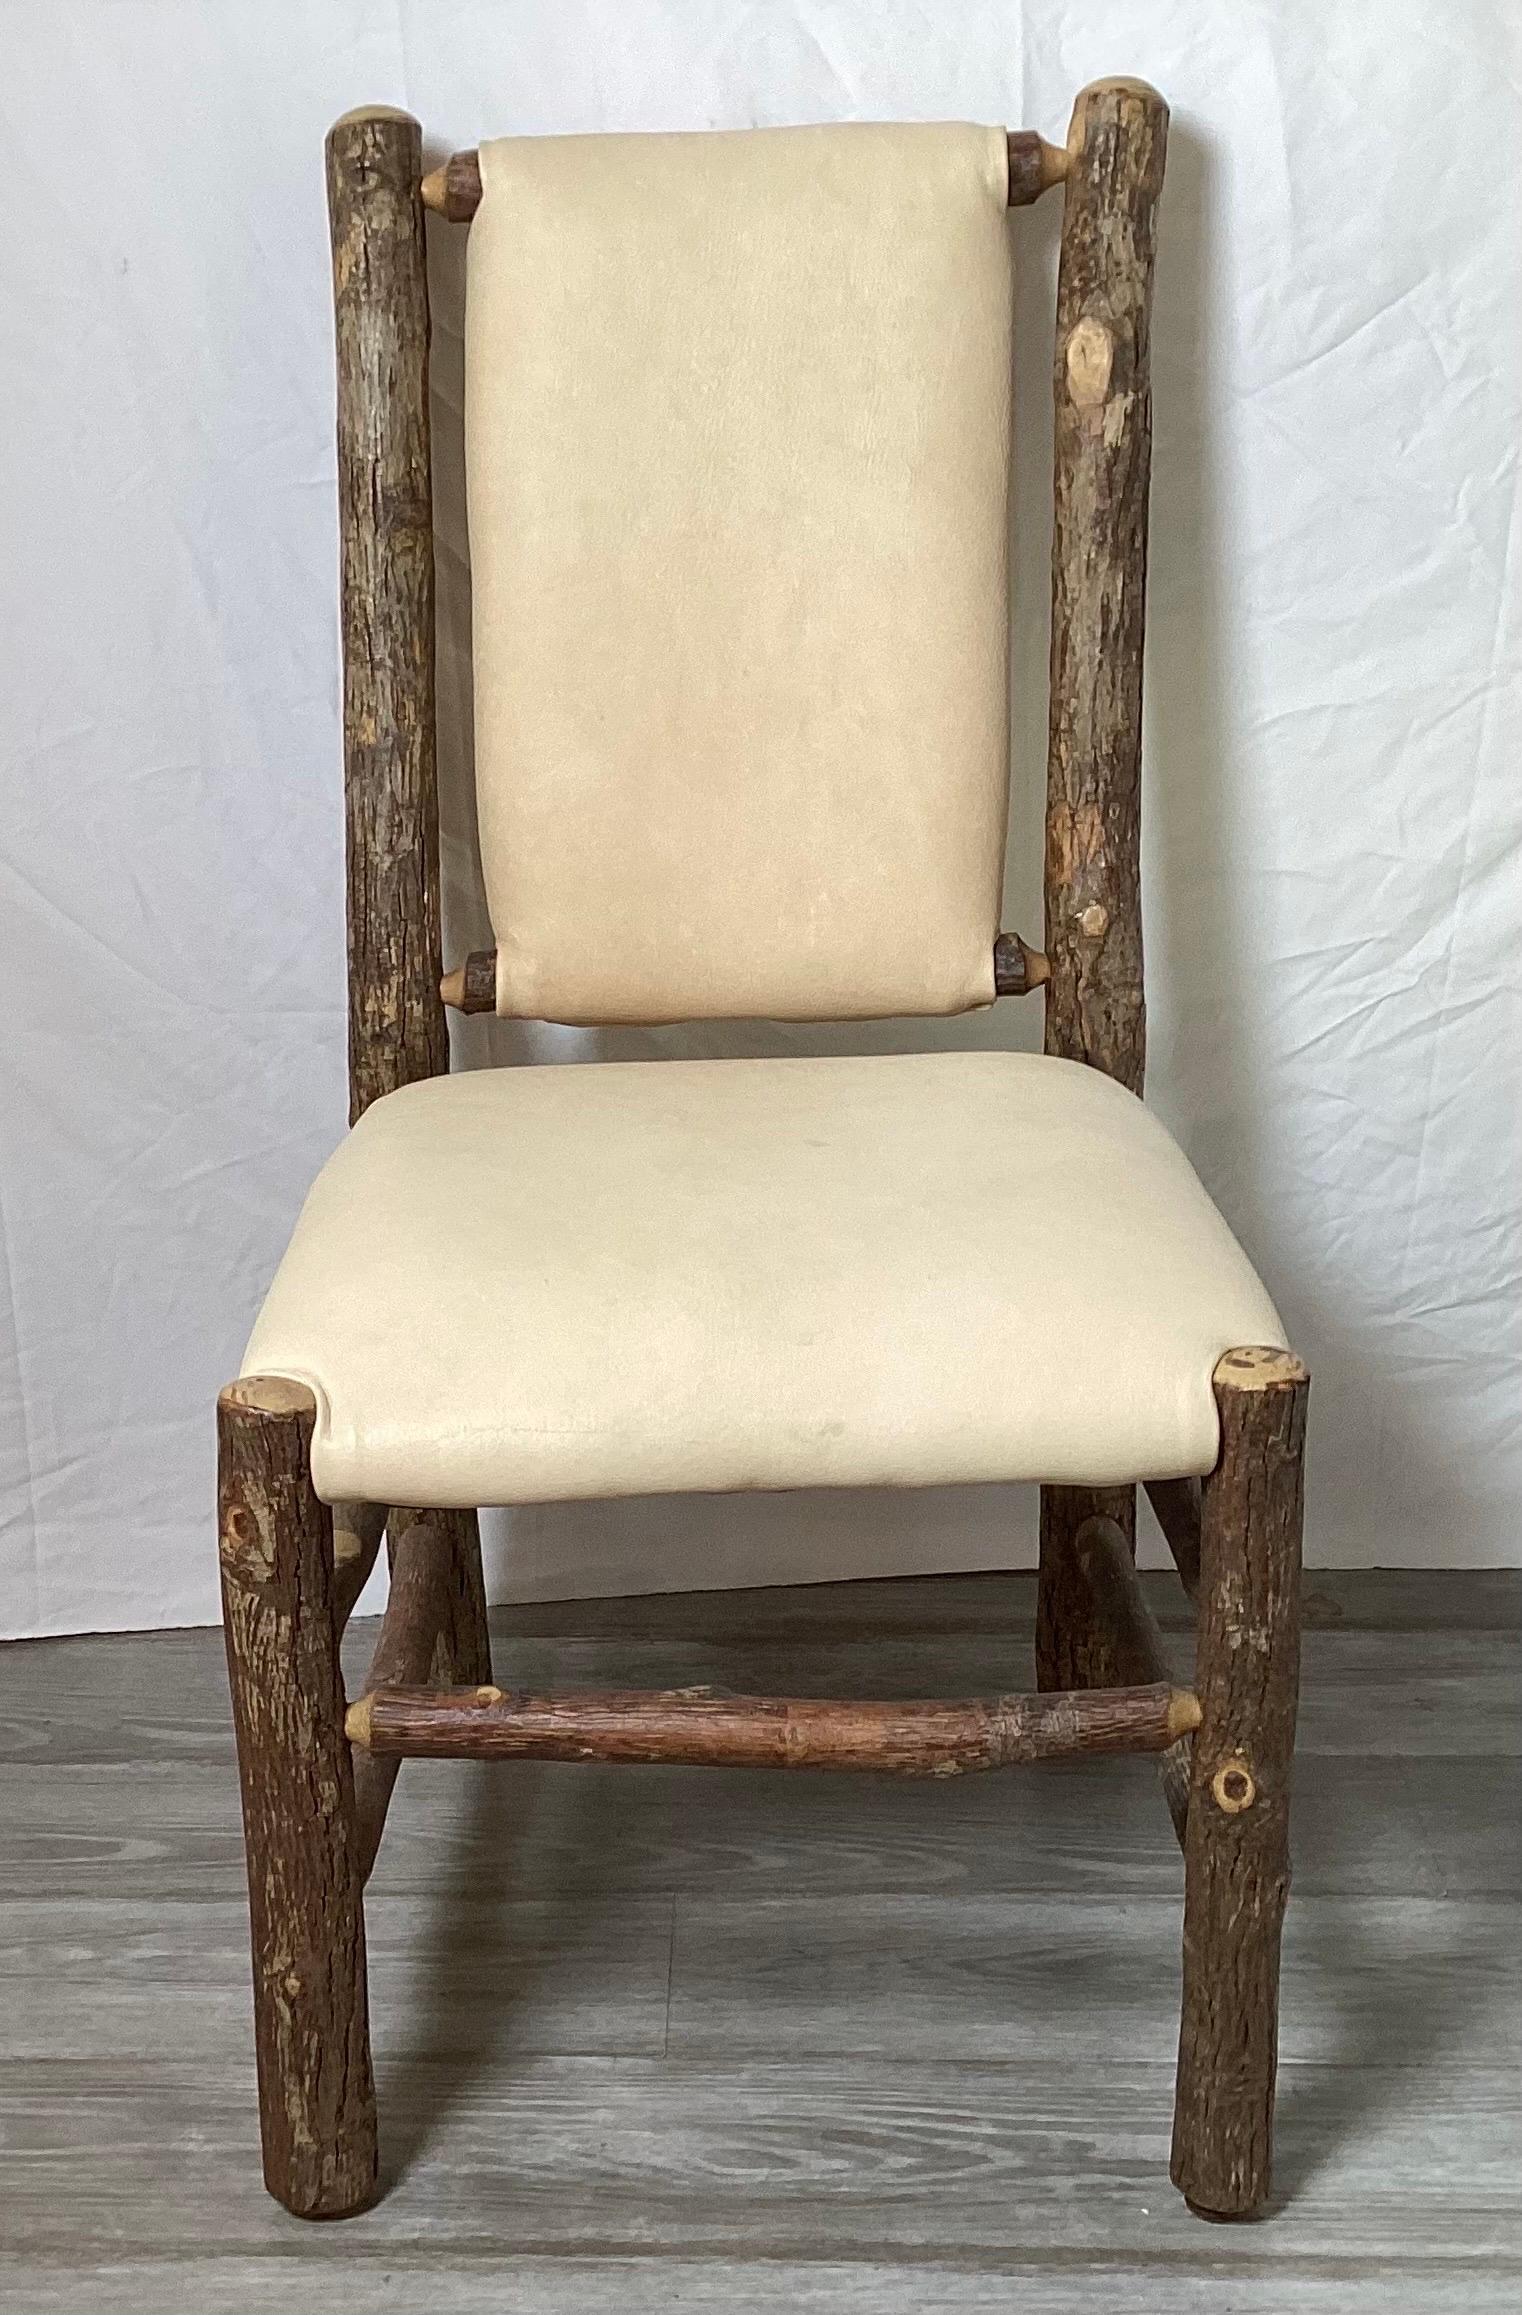 An Old Hickory side chair with deer skin seat and back. The hickory wood frame with natural bark with a light finish over the surface. The seat and back in natural color deer skin. Marked with label. Old Hickory, Shelbyville IN.